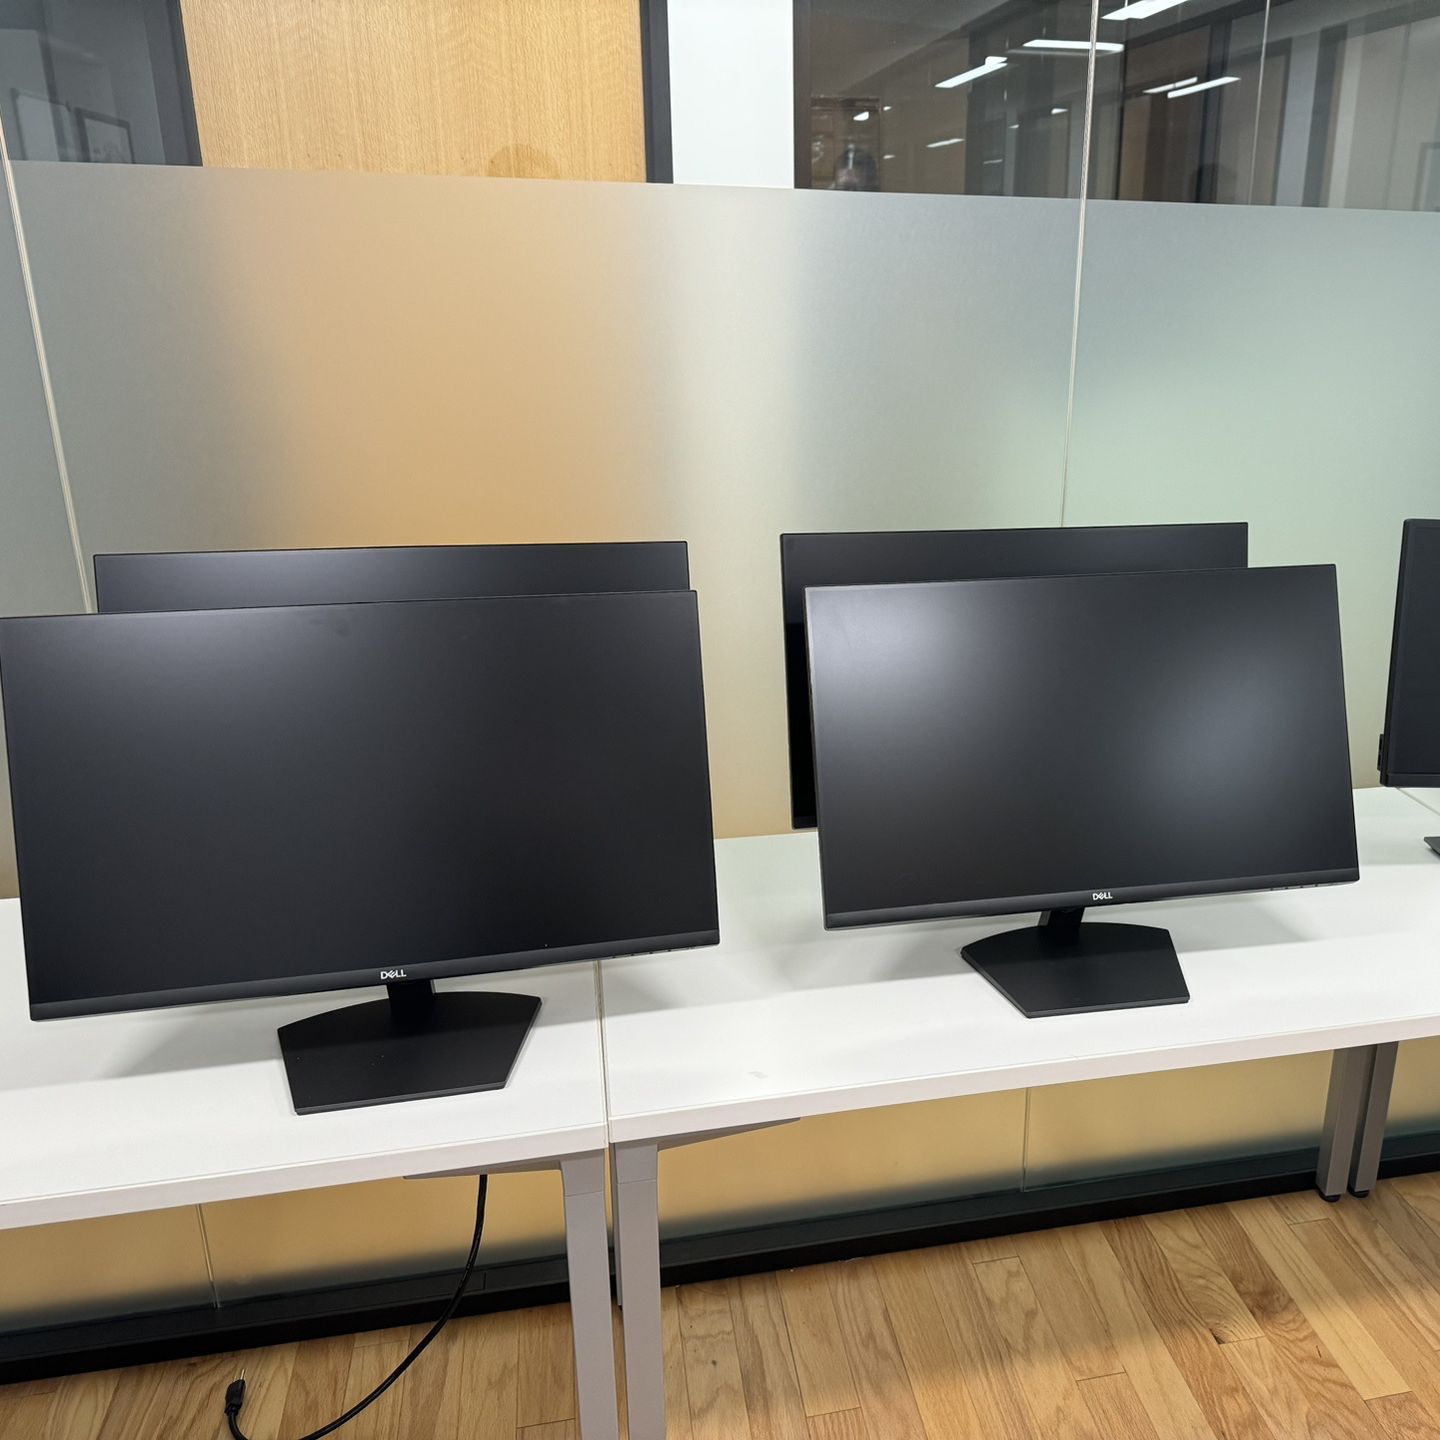 4 Dell Monitors Bundle (Can Be Bought Individually)